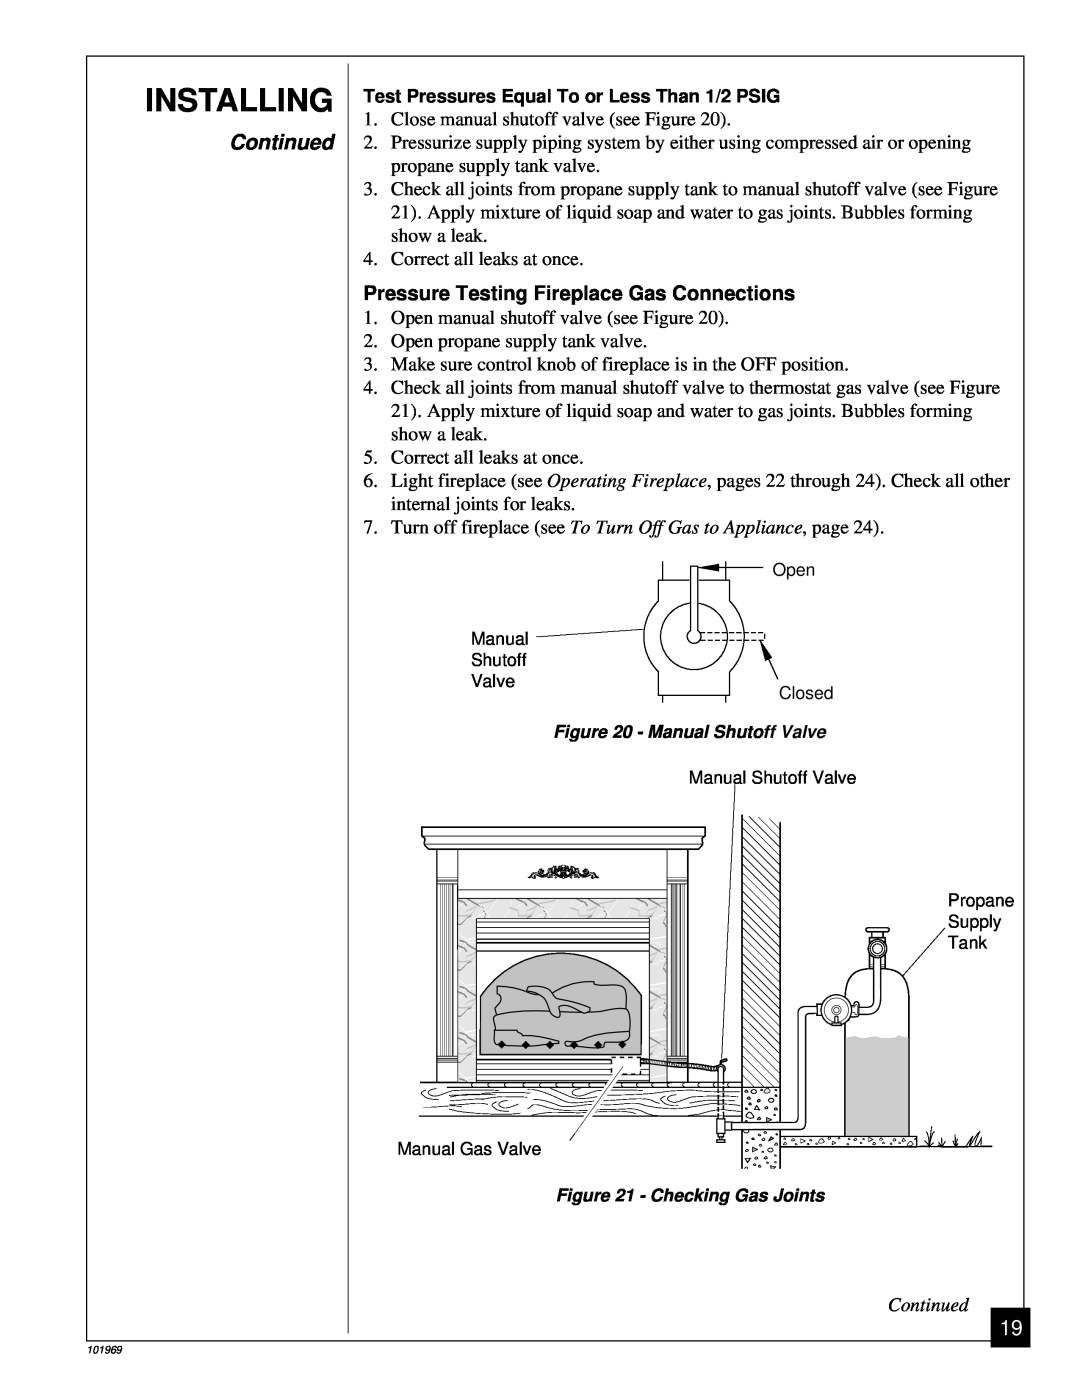 Desa UNVENTED (VENT-FREE) PROPANE GAS FIREPLACE Installing, Pressure Testing Fireplace Gas Connections, Continued 